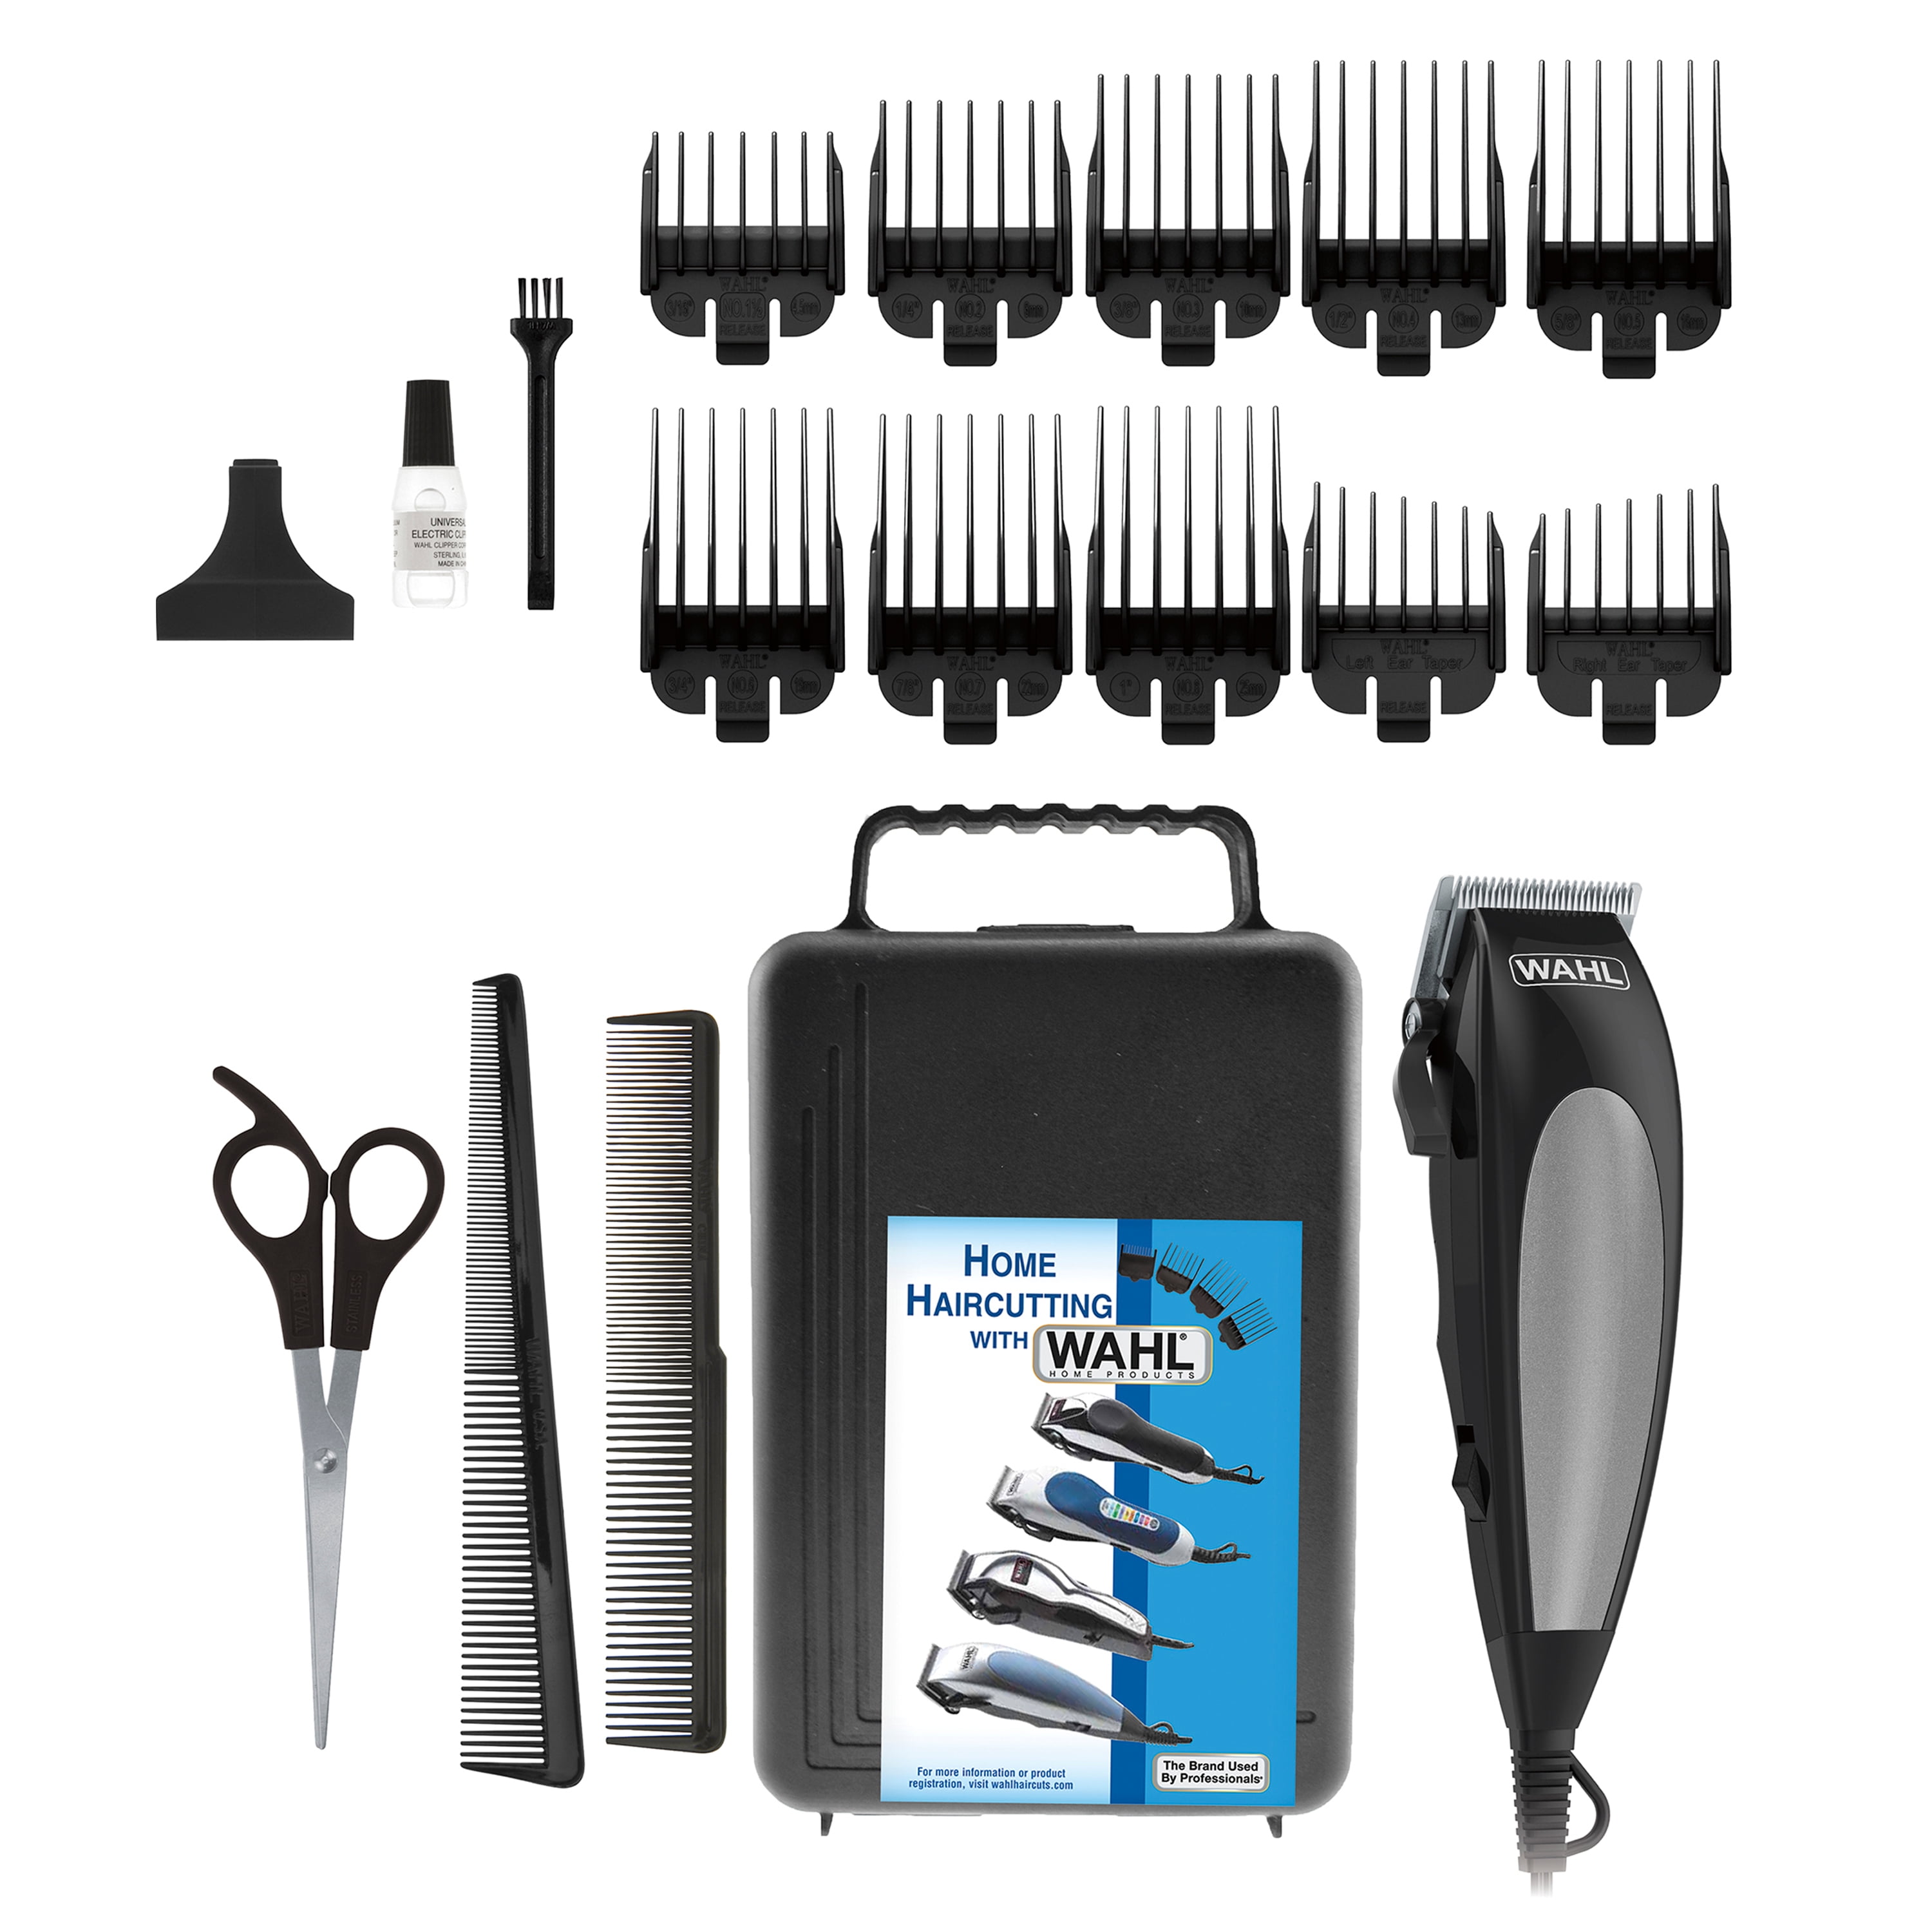 Wahl HomeCut Travel Size Male Hair Cutting Kit, Black, 18 Piece Set with  Guide Combs, Left & Right Ear Taper, Clipper Blade Guard, 9243-2301 -  